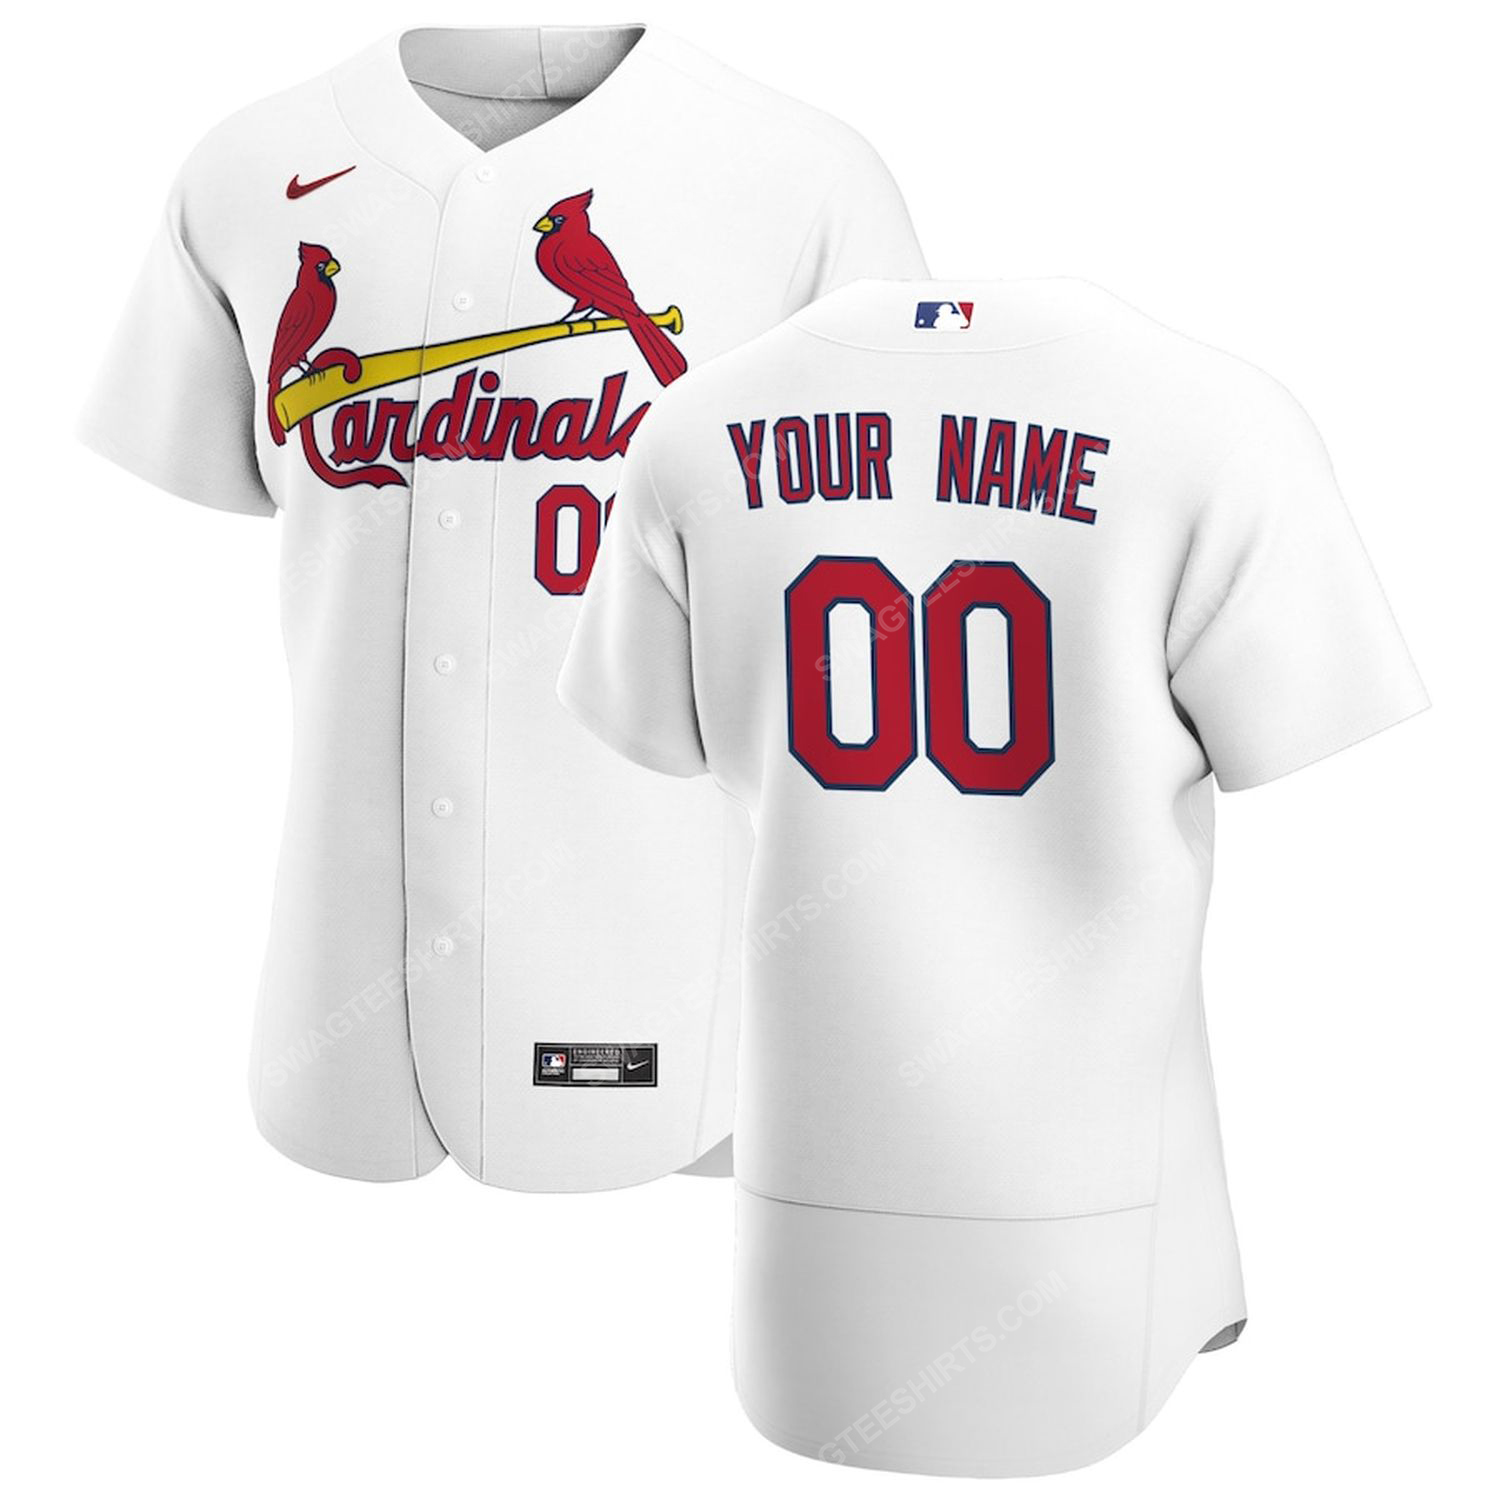 Personalized mlb st louis cardinals team baseball jersey - white